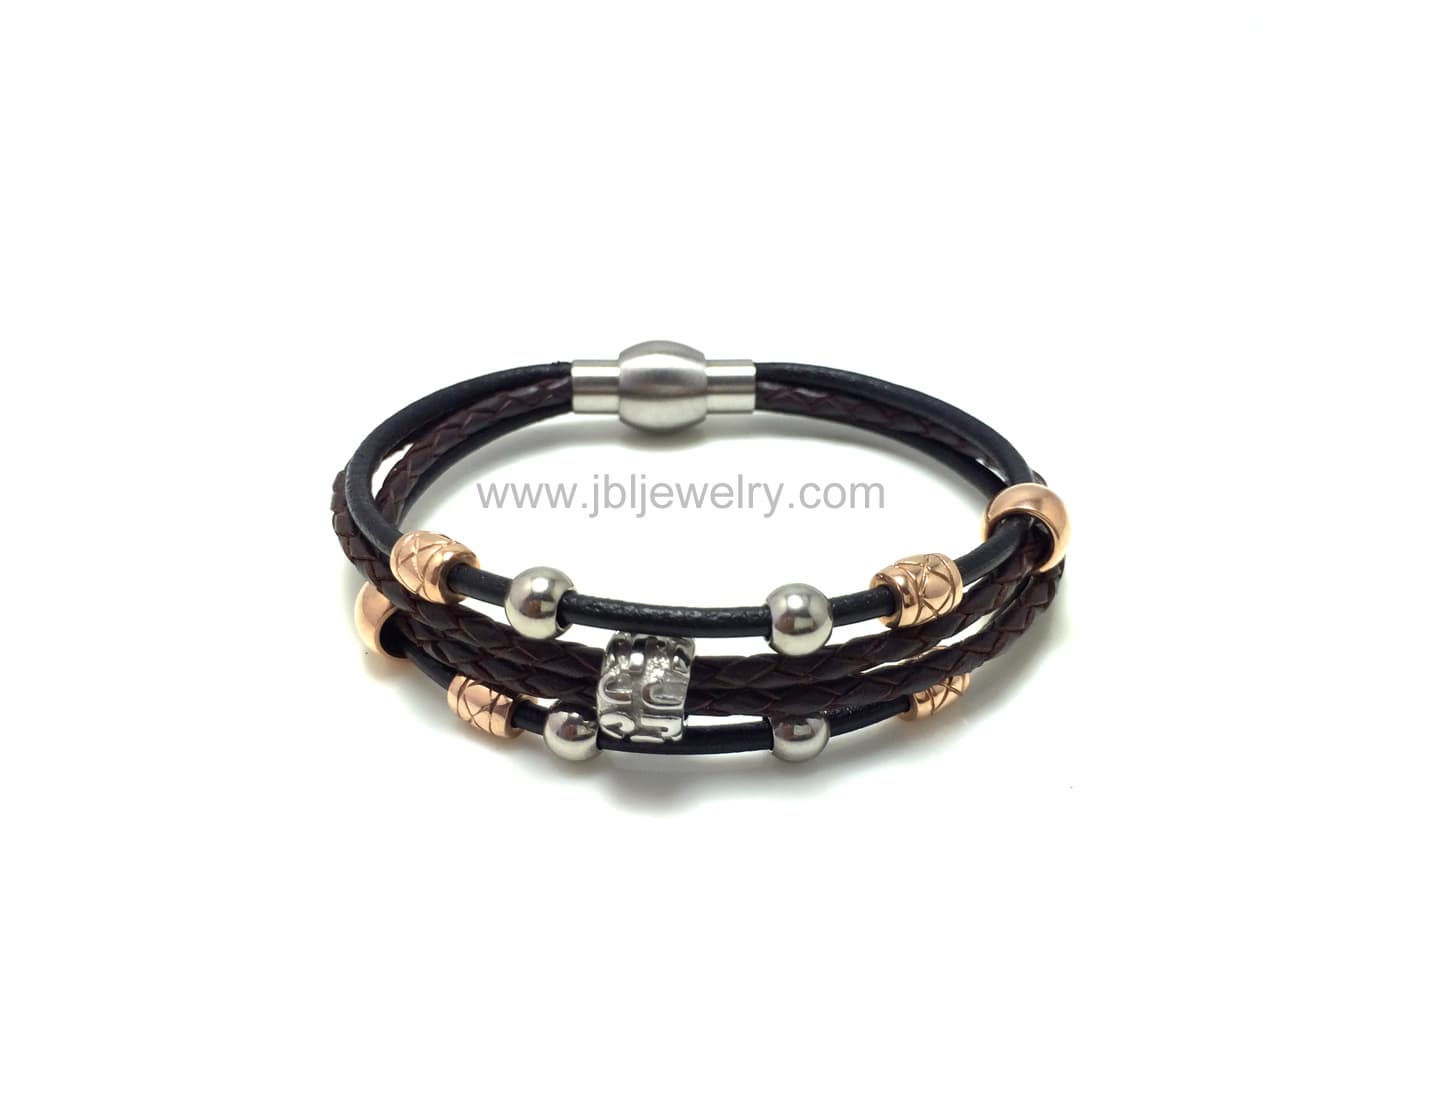 BR070 leather bracelet with stainless steel charms